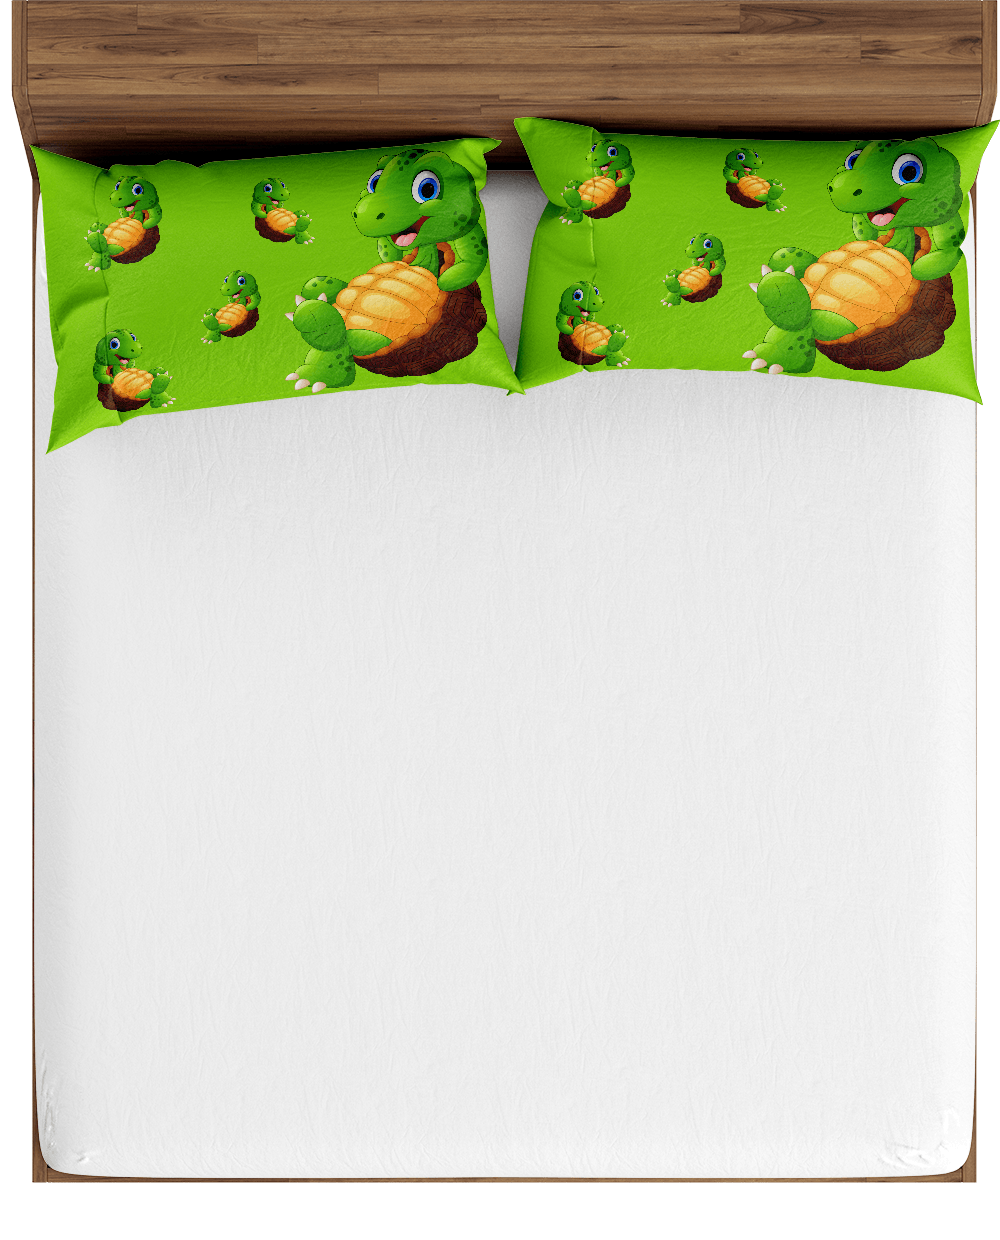 Top Turtle Bed Pillows - fungear.com.au